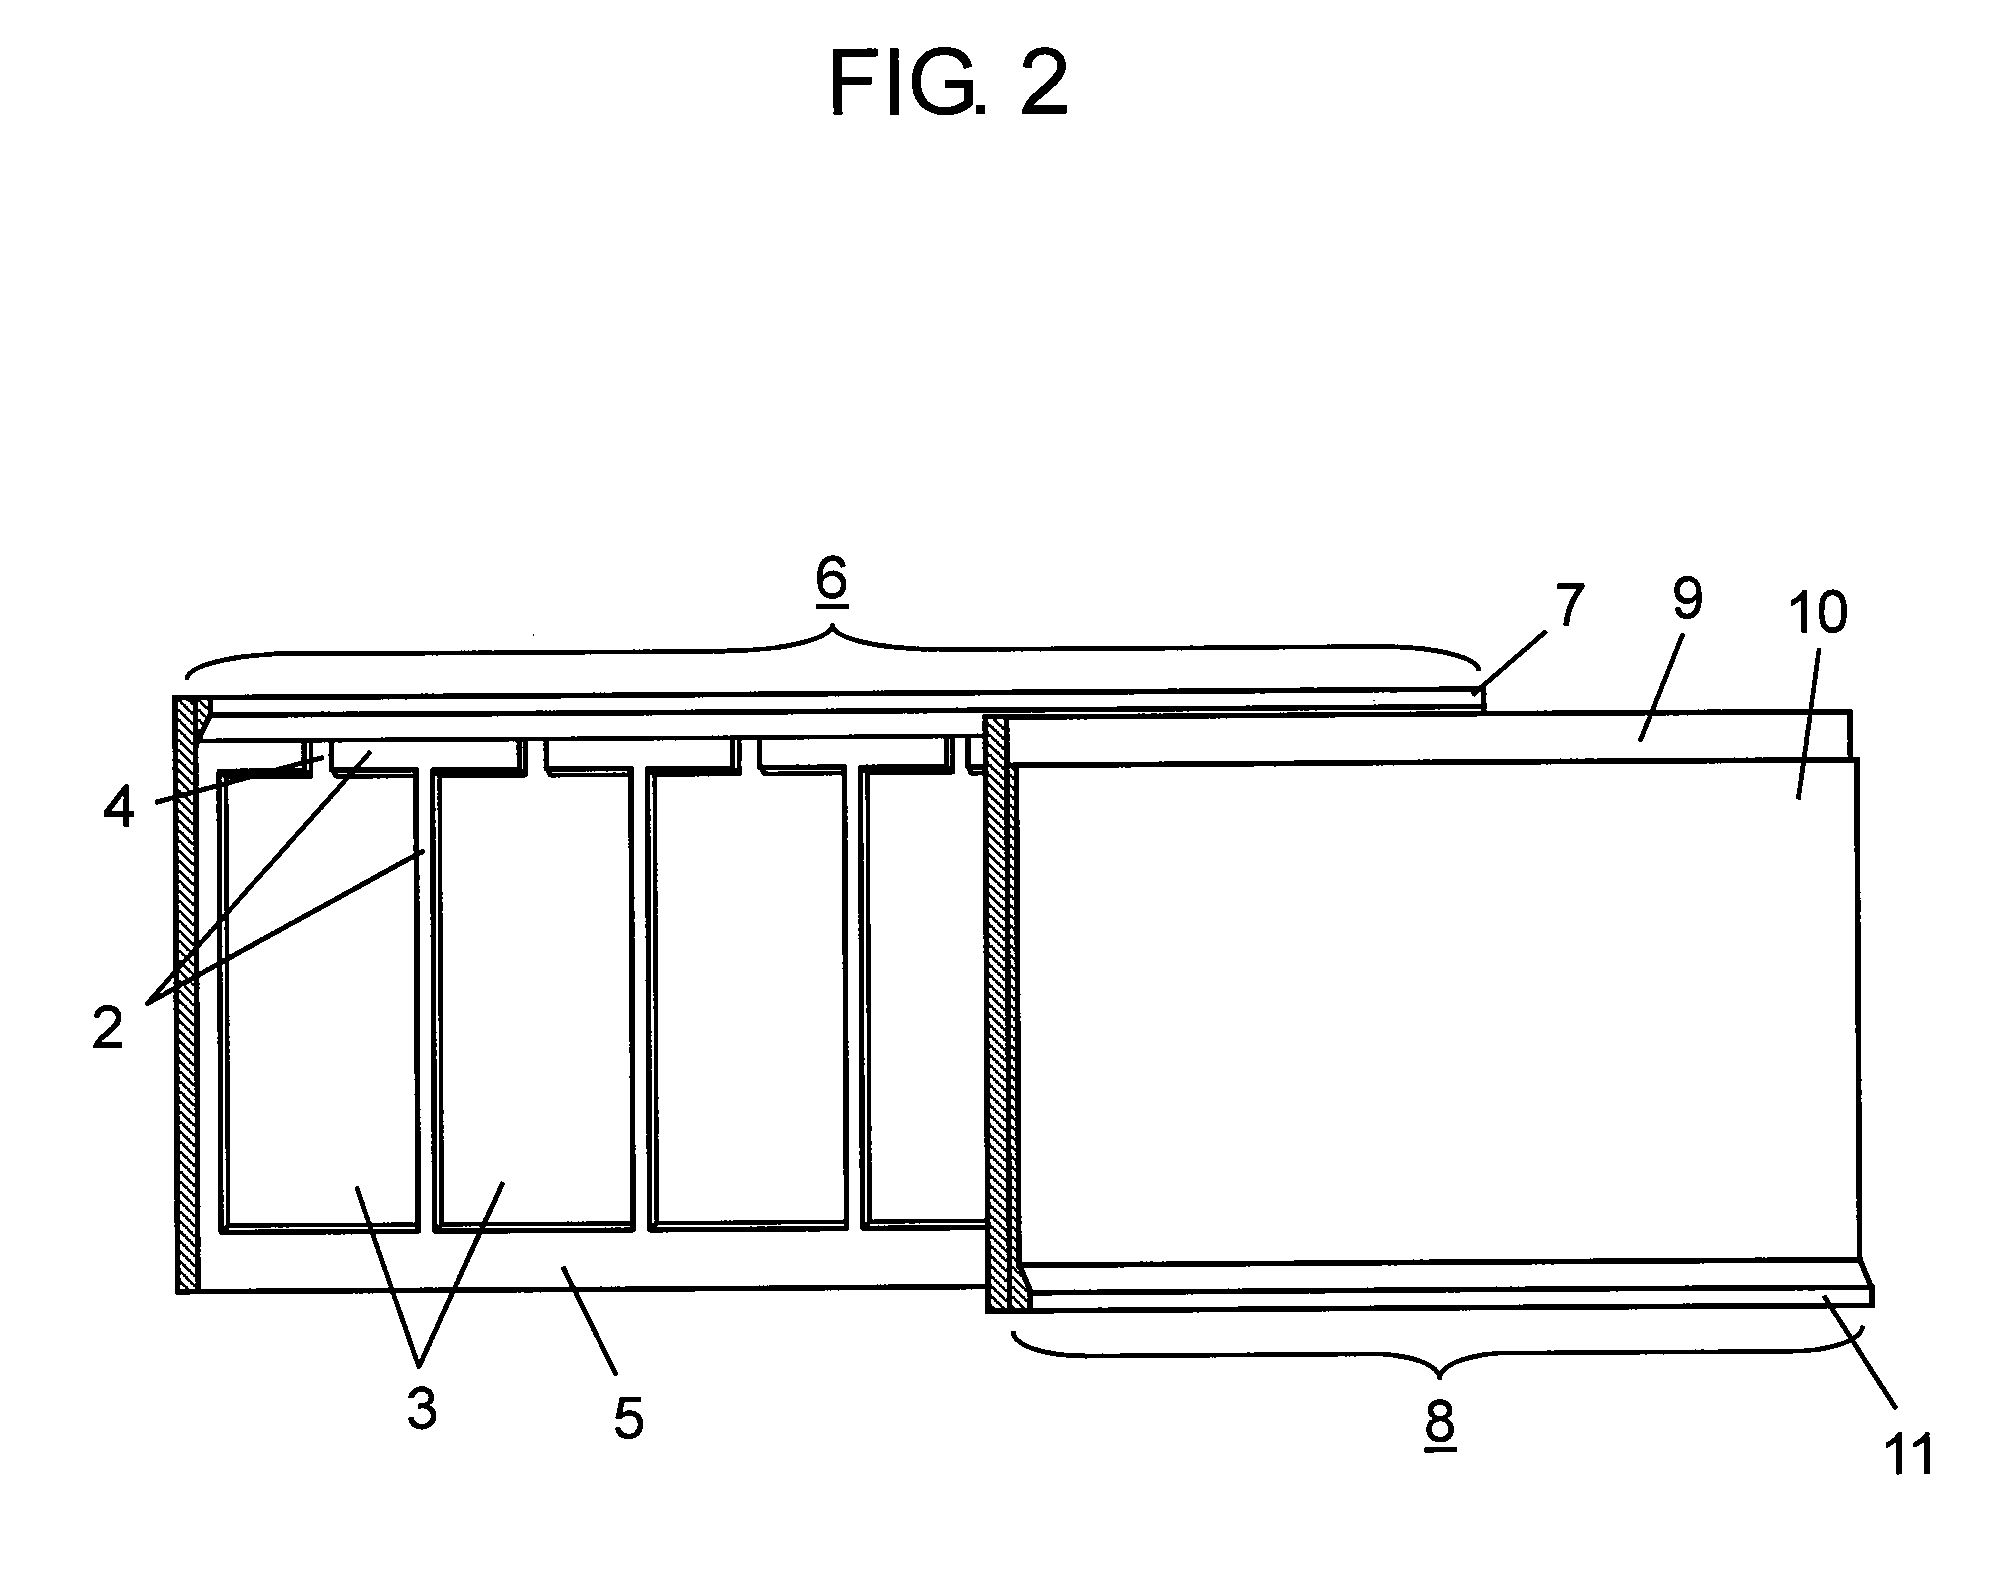 Metallization film capacitor having divided electrode with fuse